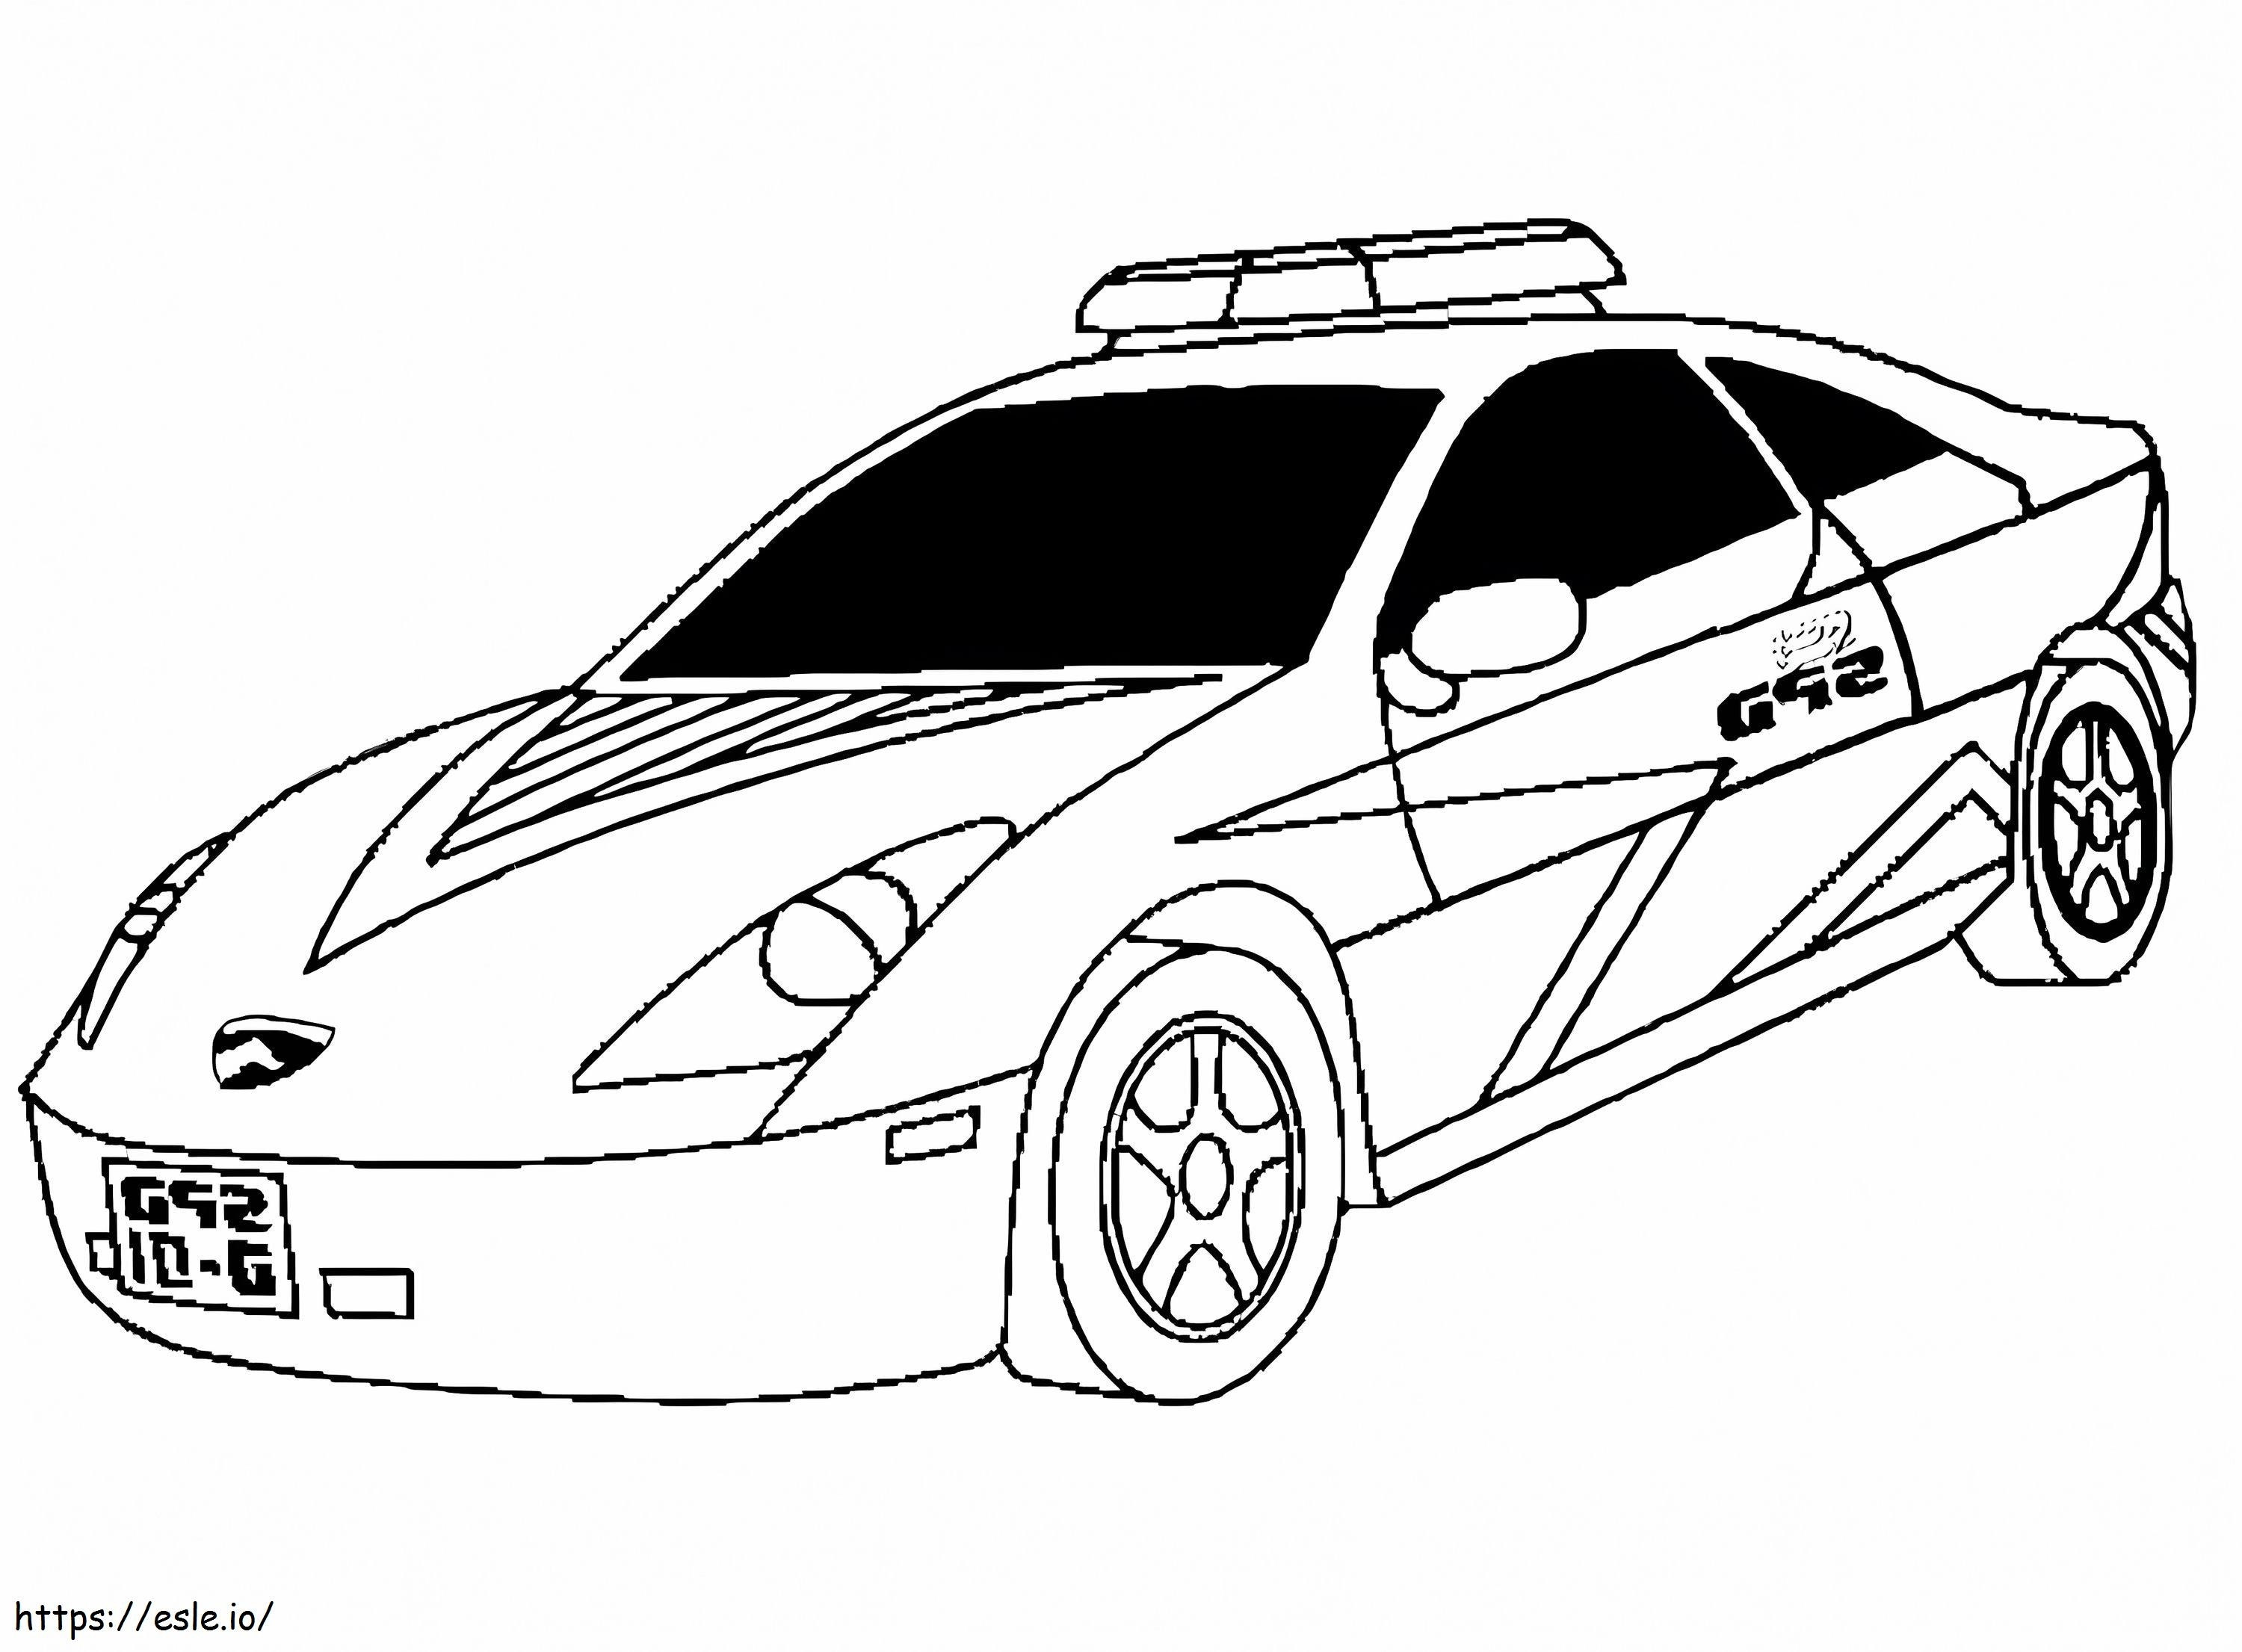 Police Car 5 coloring page